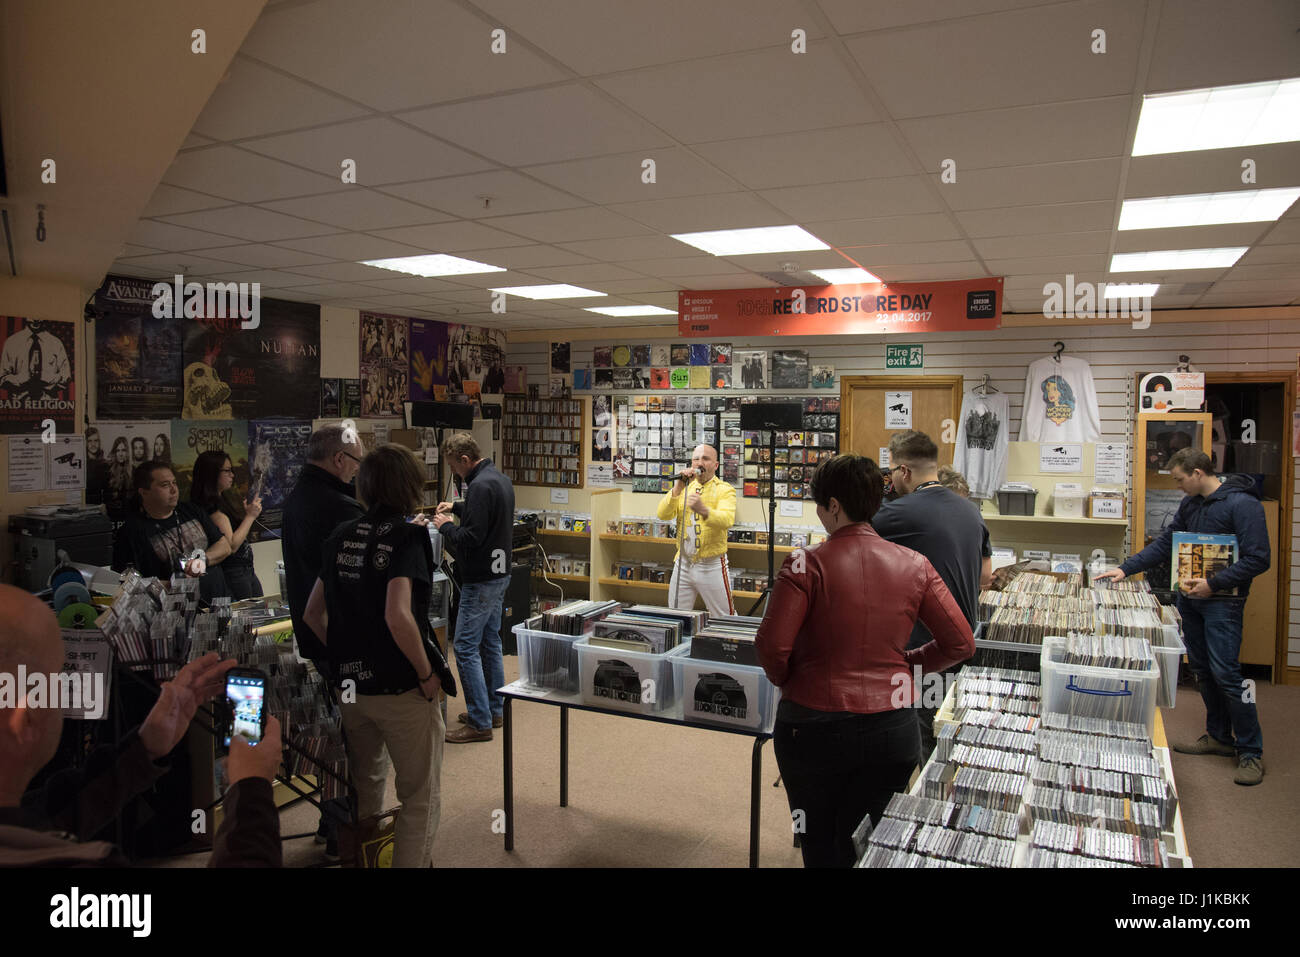 Shrewsbury, Shropshire, UK. 22nd April 2017. Inside Tubeway Records, one of three independent vinyl record shops in Shrewsbury, Shropshire that opened their doors for the 10th Record Store Day, 2017. Many shops have live music playing on Record Store Day and today in Tubeway Records, a Queen tribute act entertained the many shoppers. Credit: Richard Franklin/Alamy Live News Stock Photo